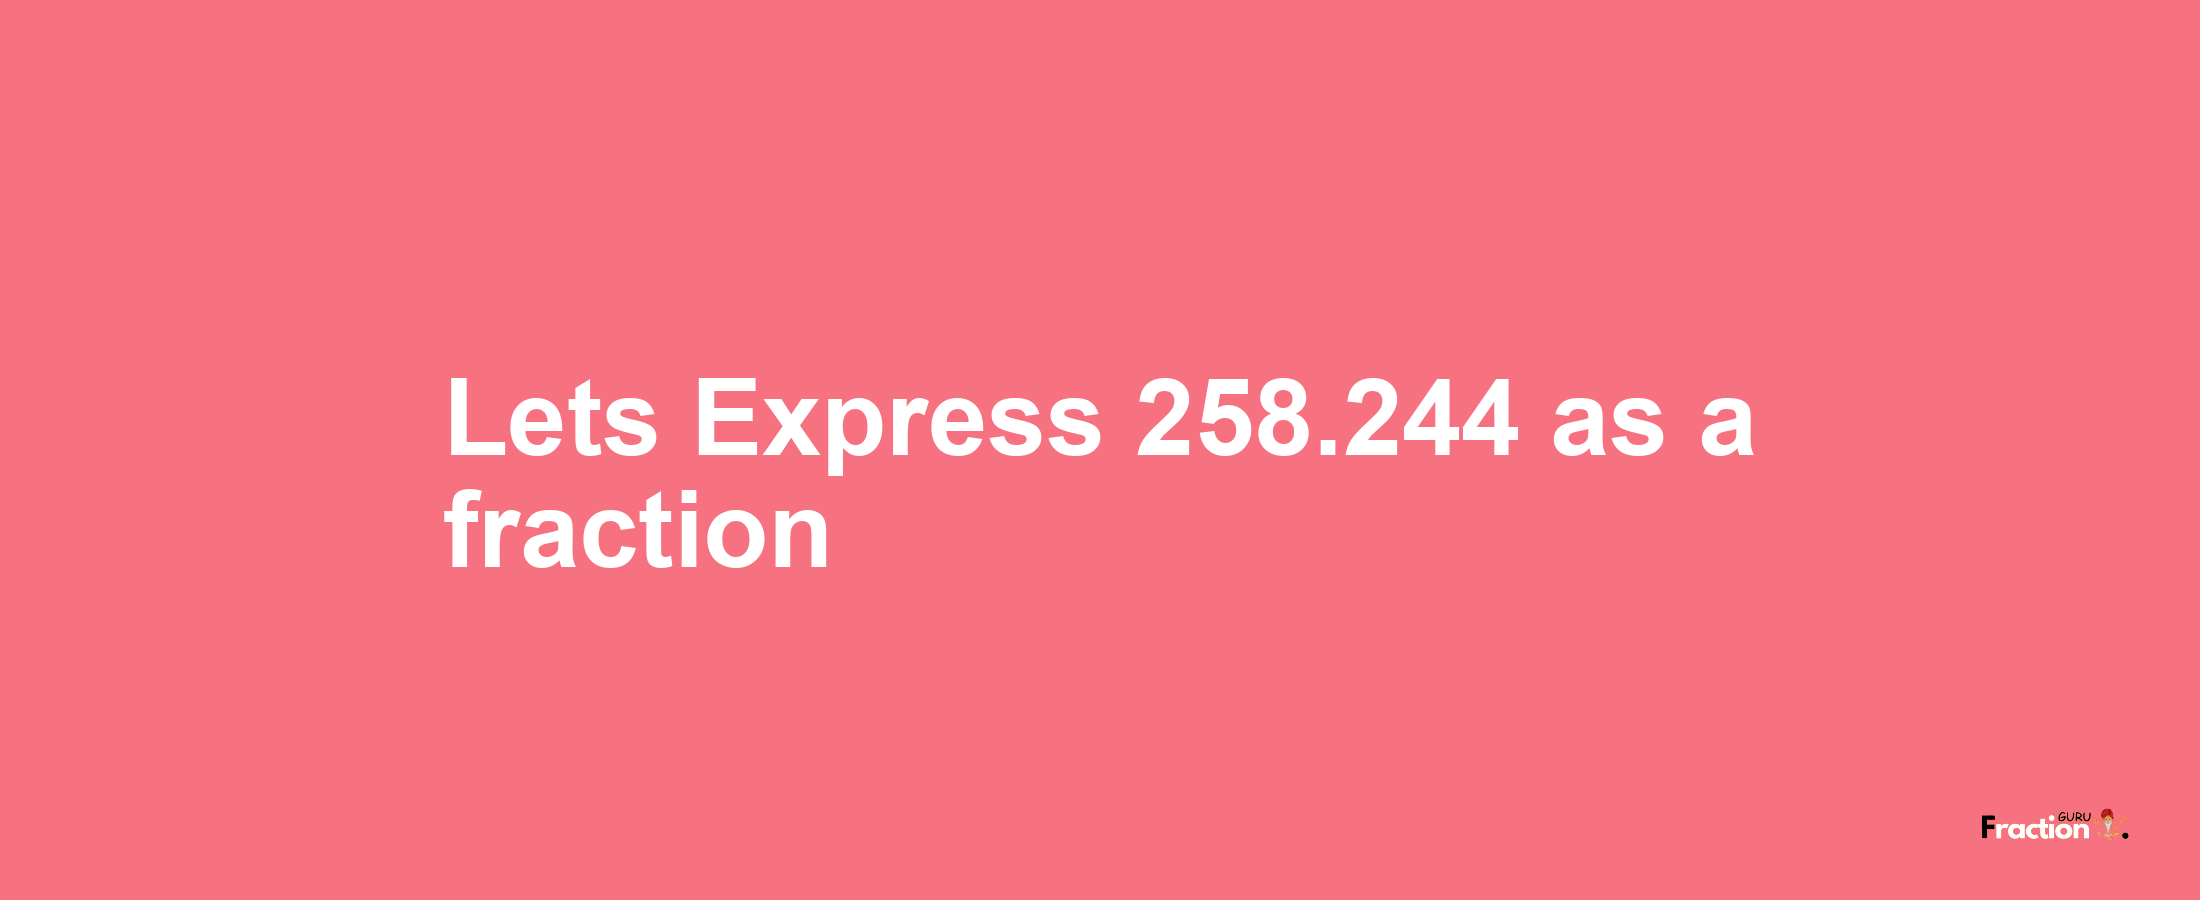 Lets Express 258.244 as afraction